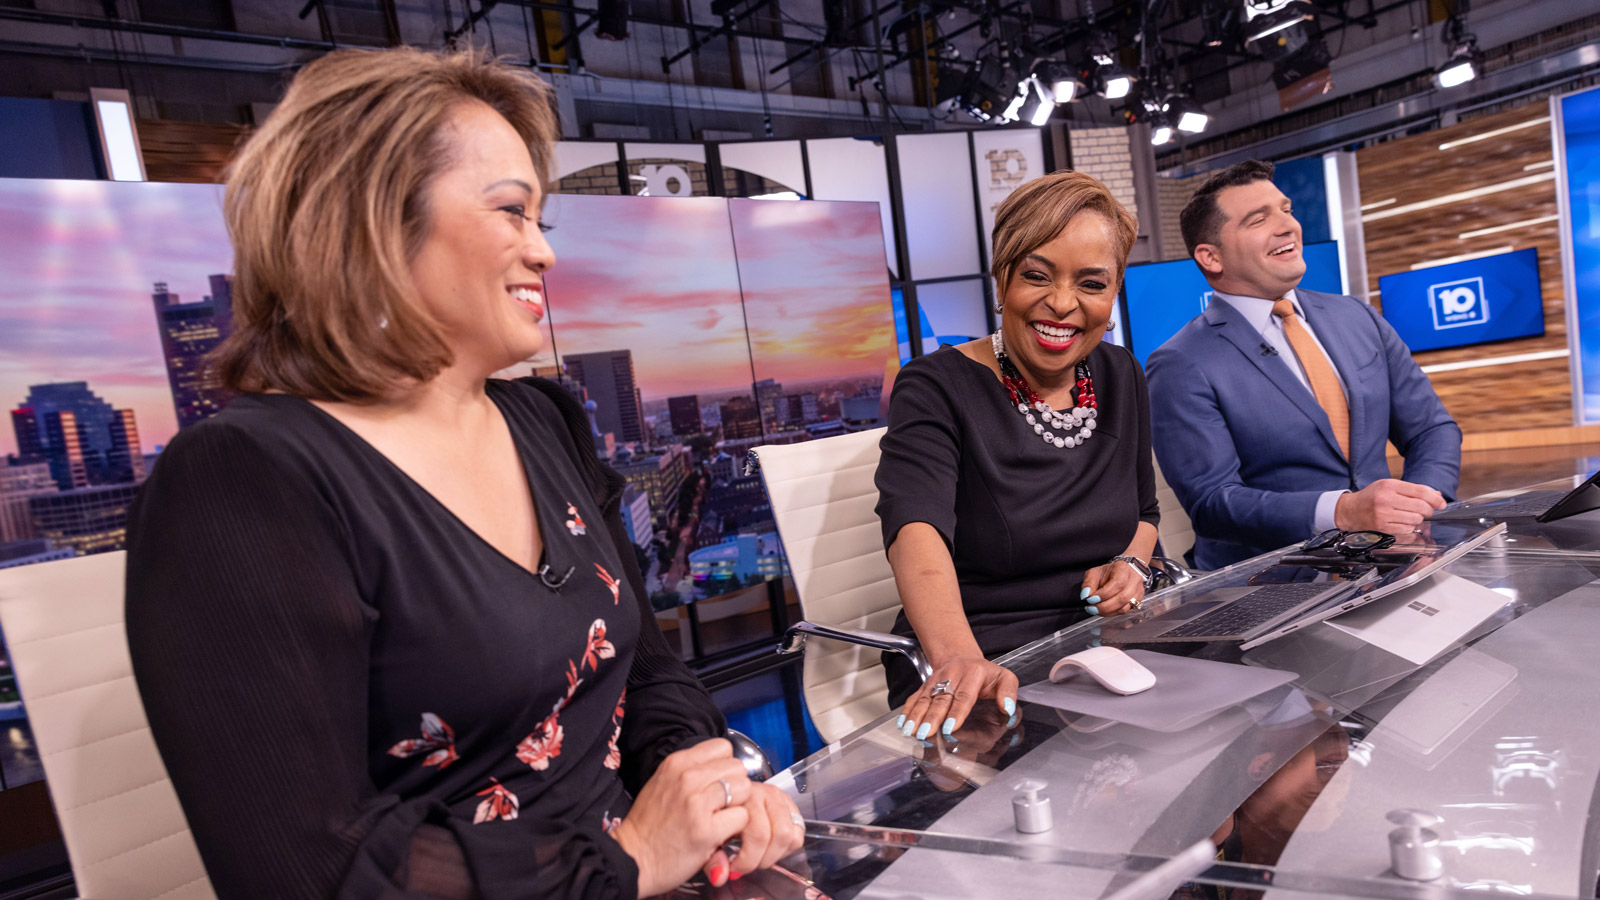 Tracy Townsend is seriously laughing as she puts her hand down on the long studio desk. She’s looking toward colleague Angela An, who is smiling. On Tracy’s other side sits Clay Gordon. He is also laughing. The three, who are on air, are all dressed up and seem well in-tune in their amusement